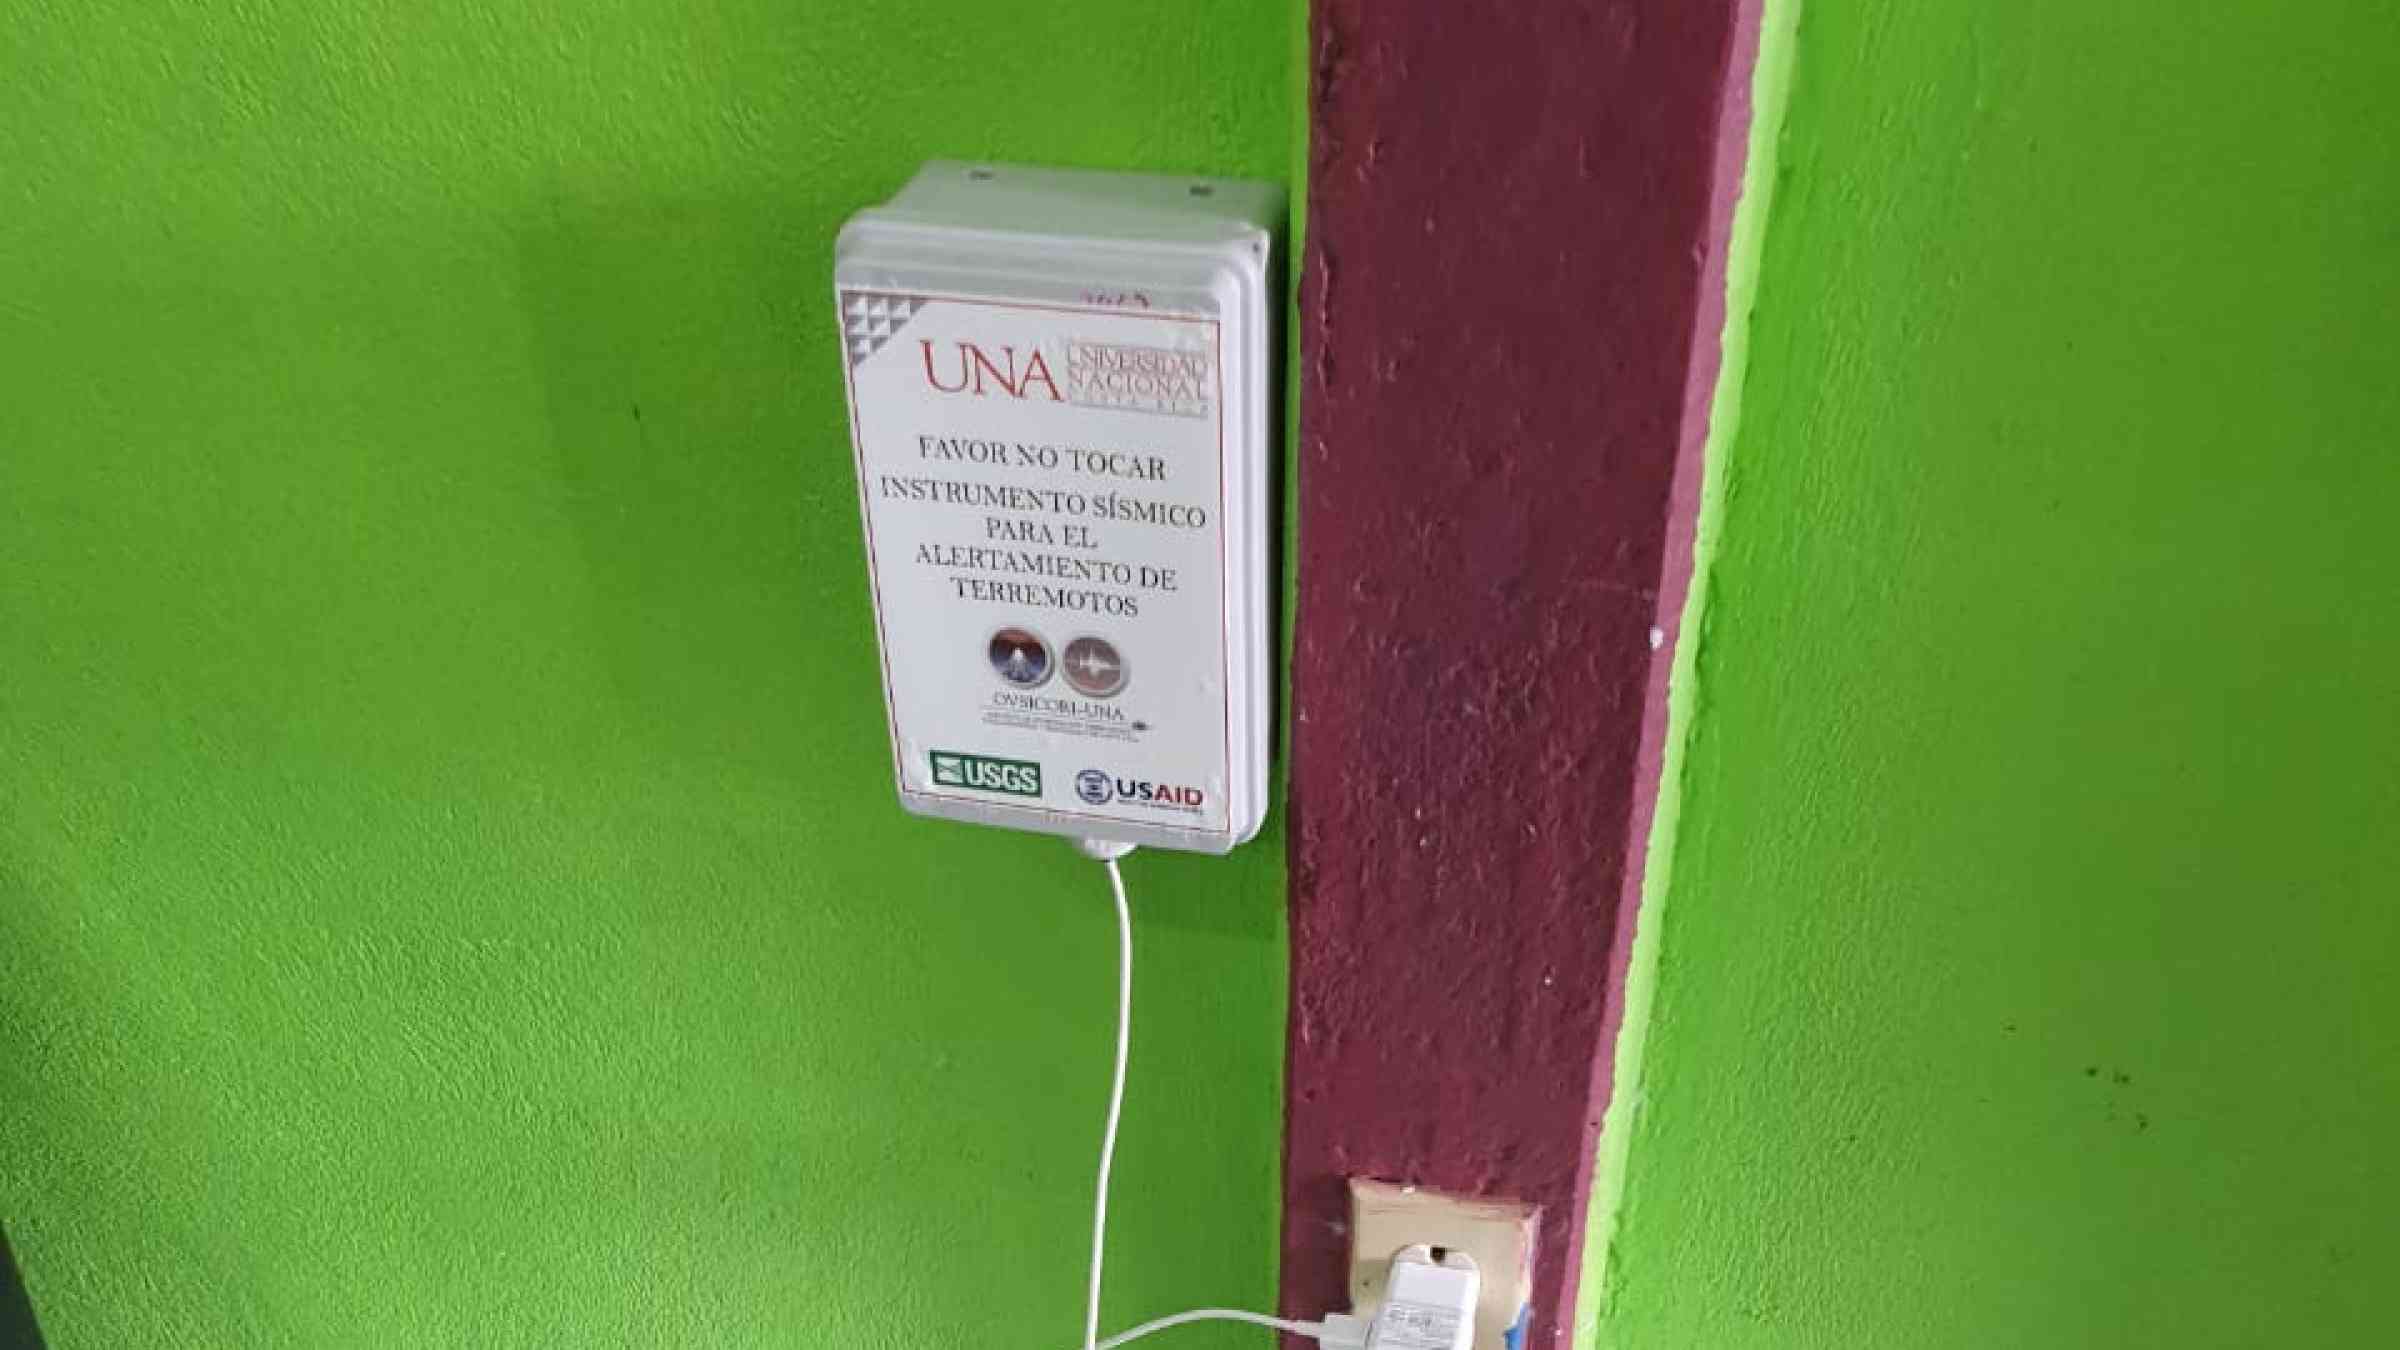   A smartphone for earthquake early warning boxed and plugged in to a wall in Costa Rica. 